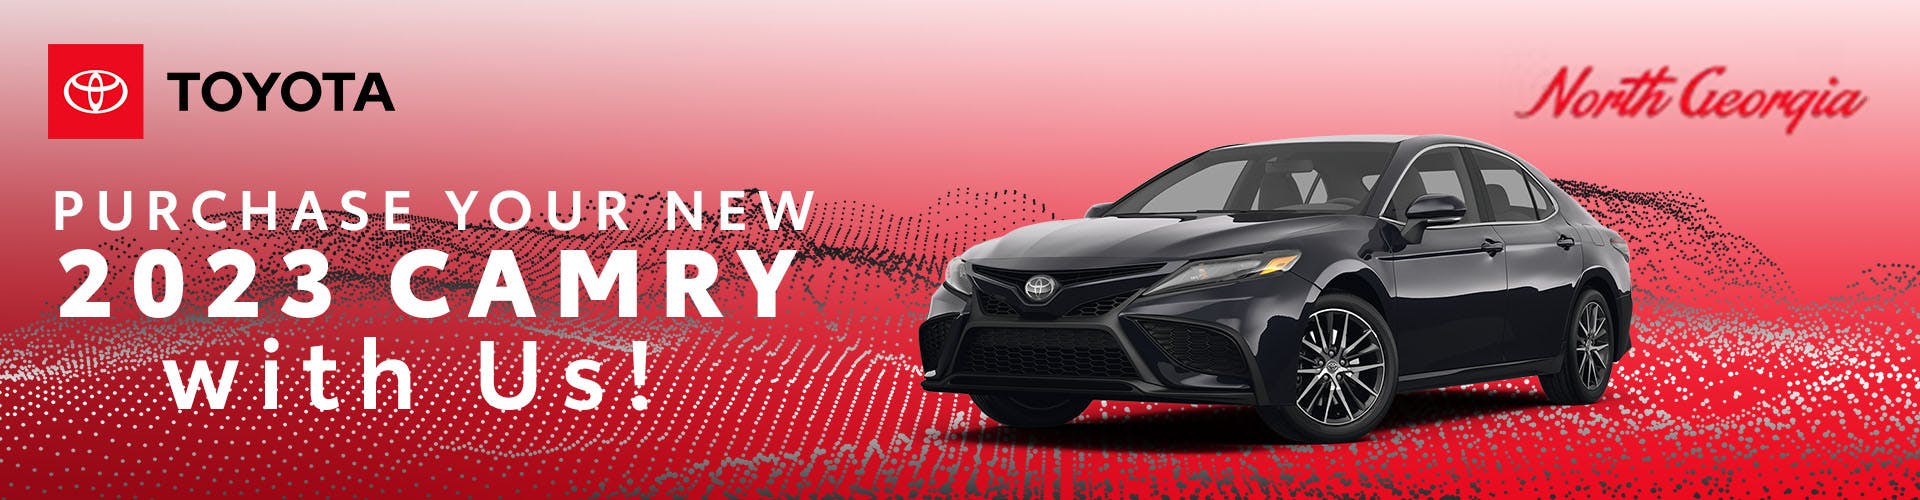 2Toyota Camry Offer